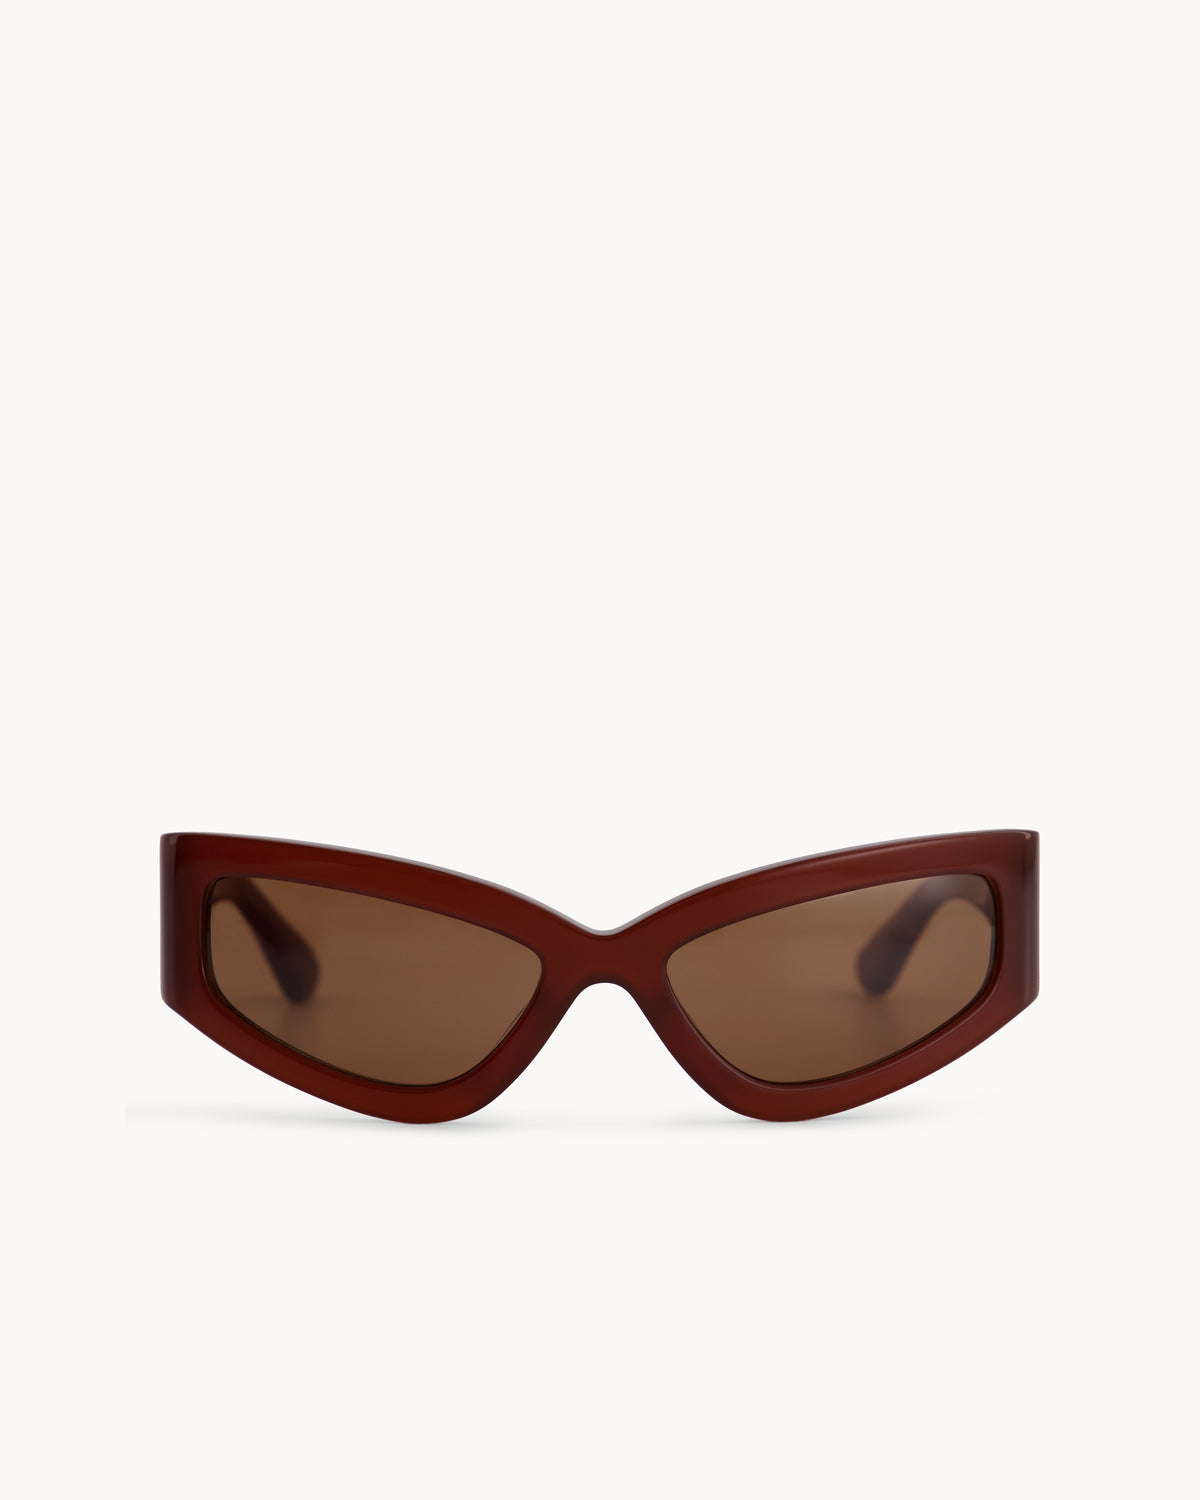 Port Tanger Shyan Sunglasses in Terracotta Acetate and Tobacco Lenses 1